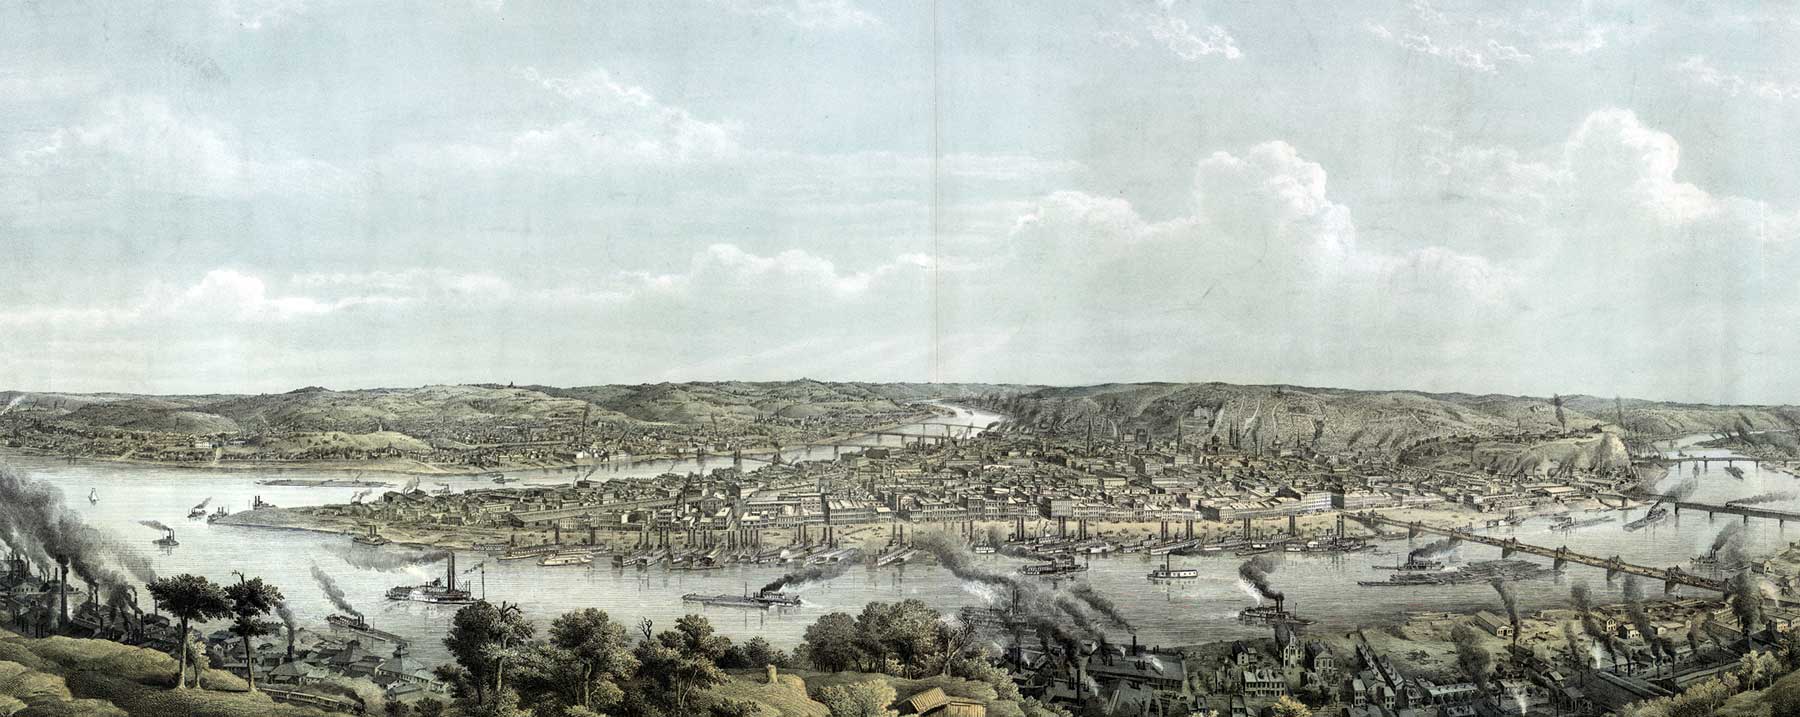 Pittsburgh in the 1860s